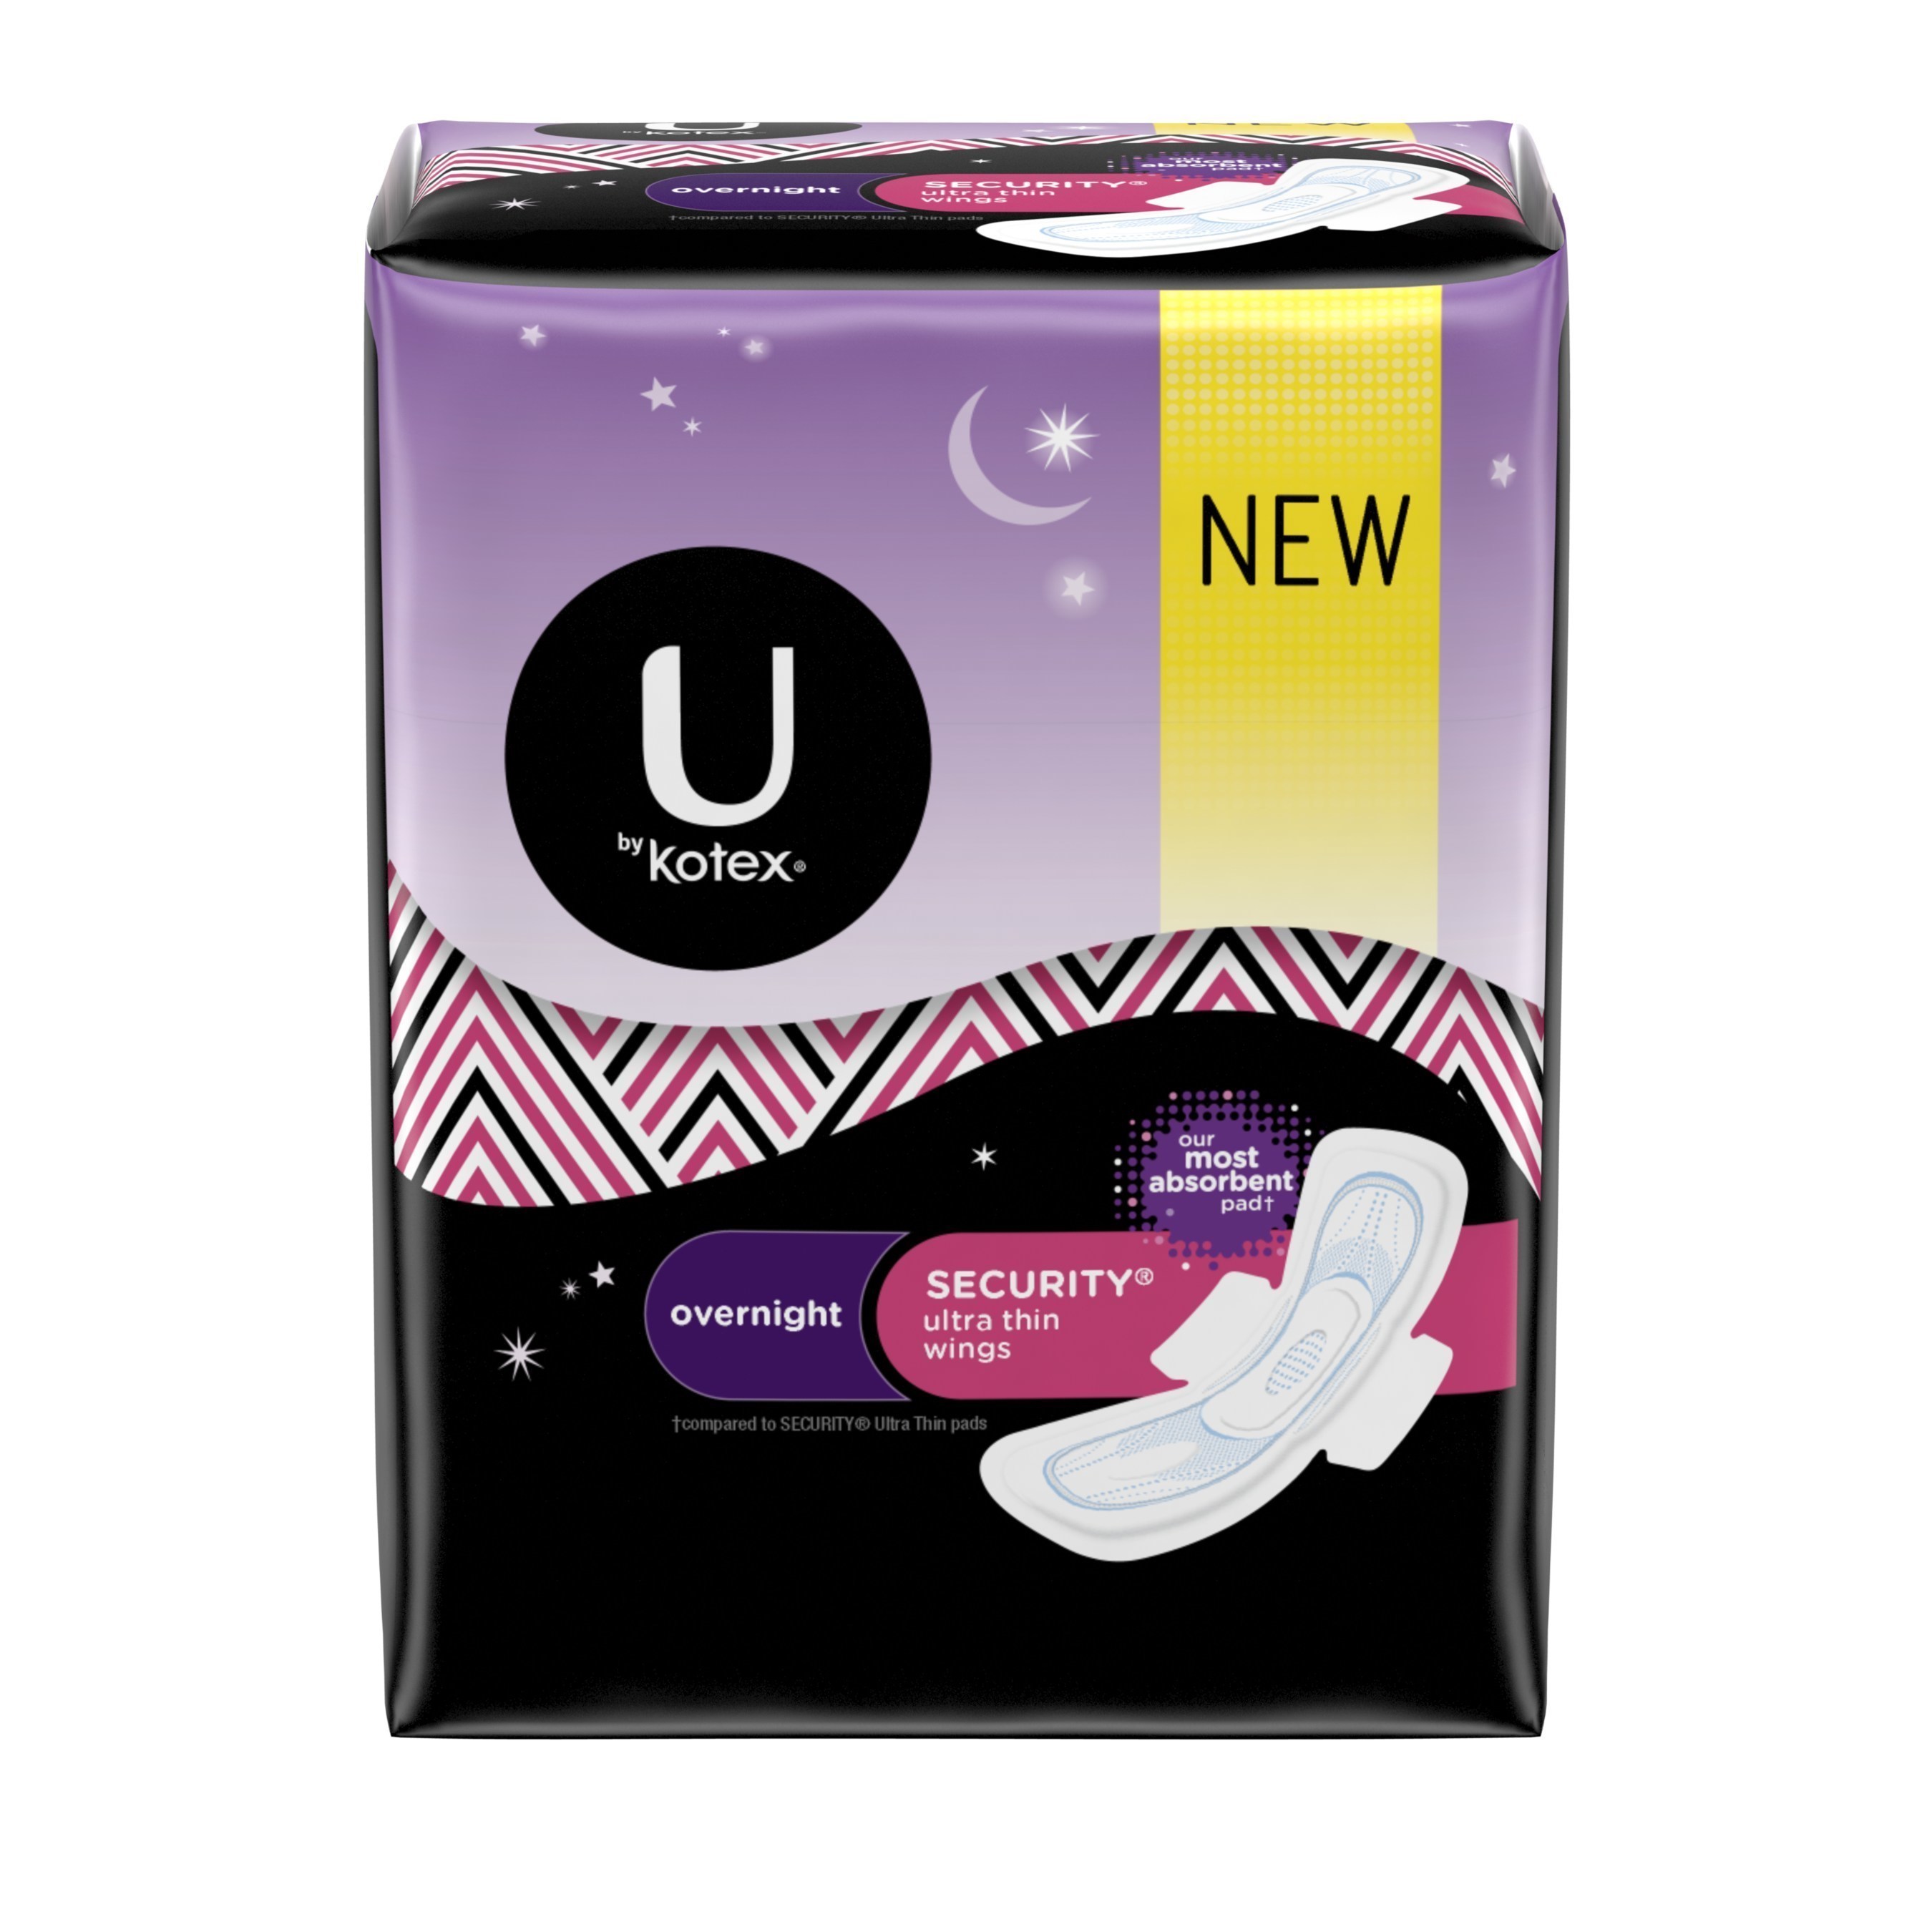 U by Kotex Security Ultra Thin Overnight Pads With Wing